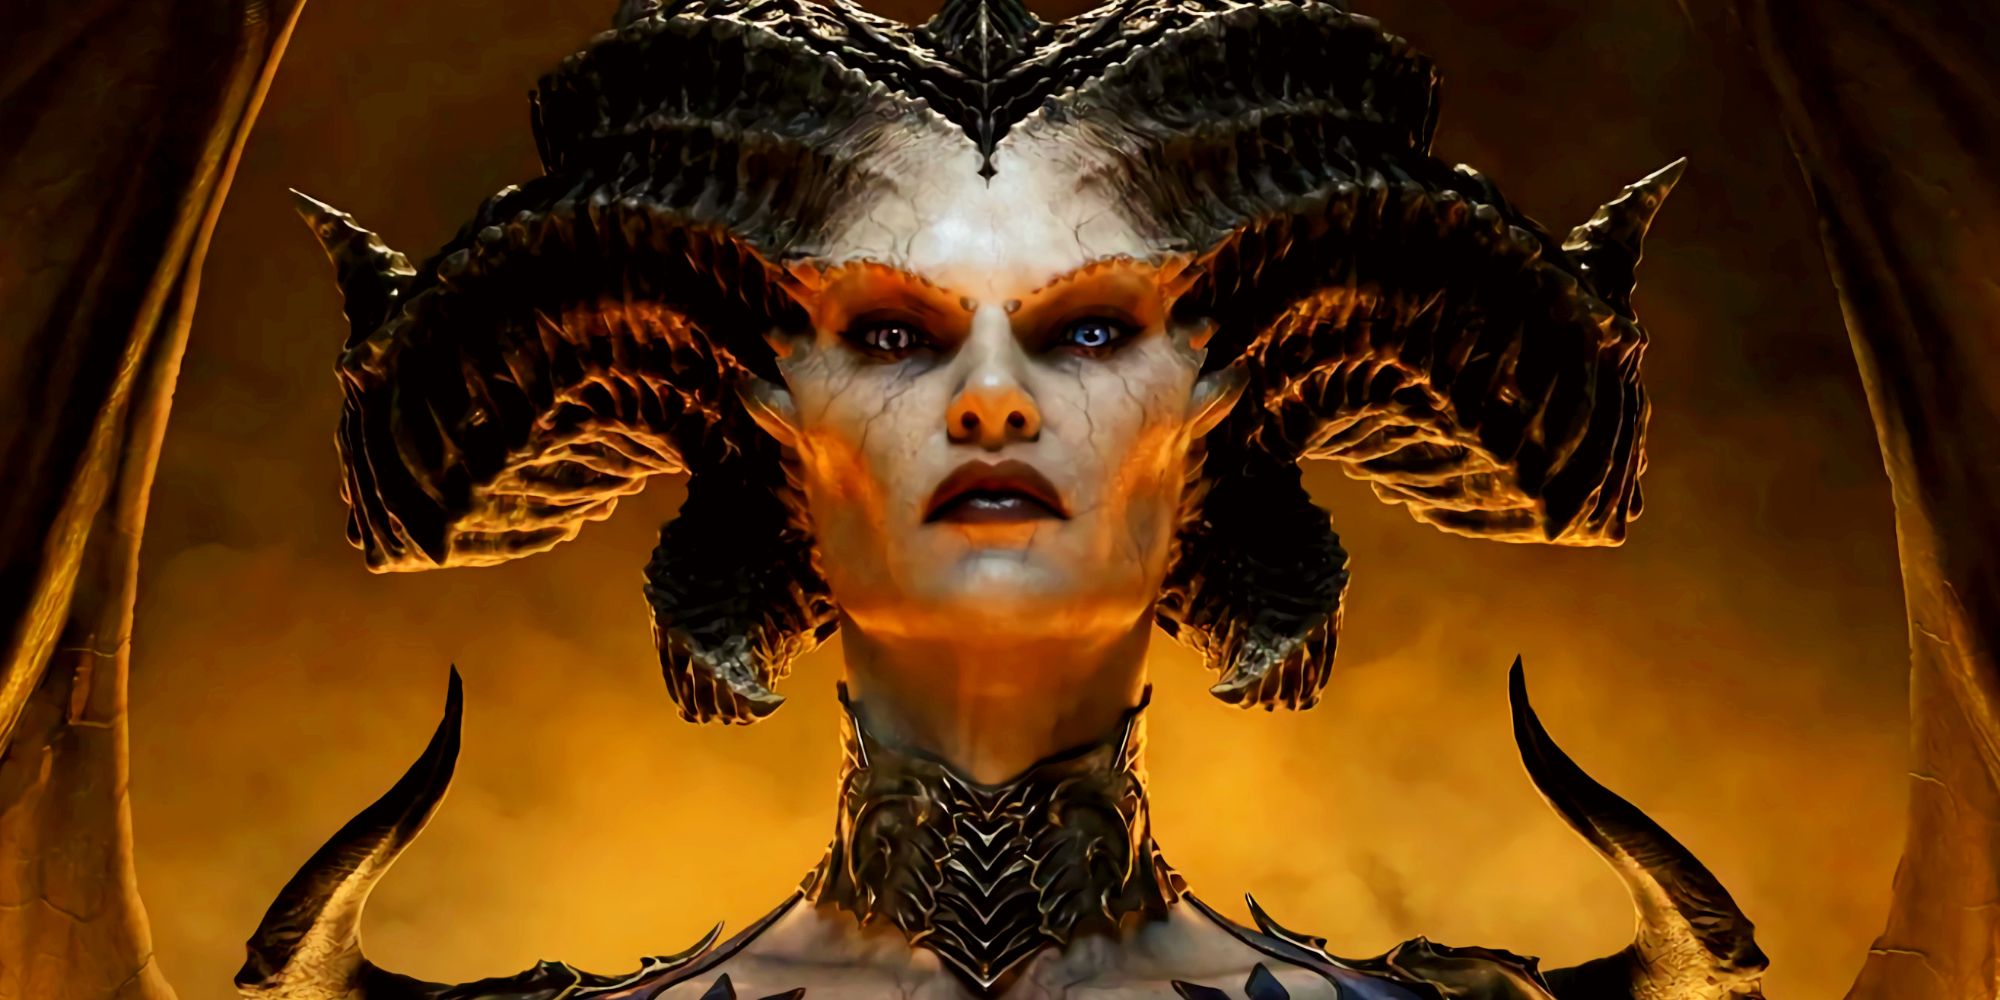 The horned and winged demon Lilith in the key art for Diablo 4's Ultimate Edition, looking directly at the camera and bathed in a golden light.